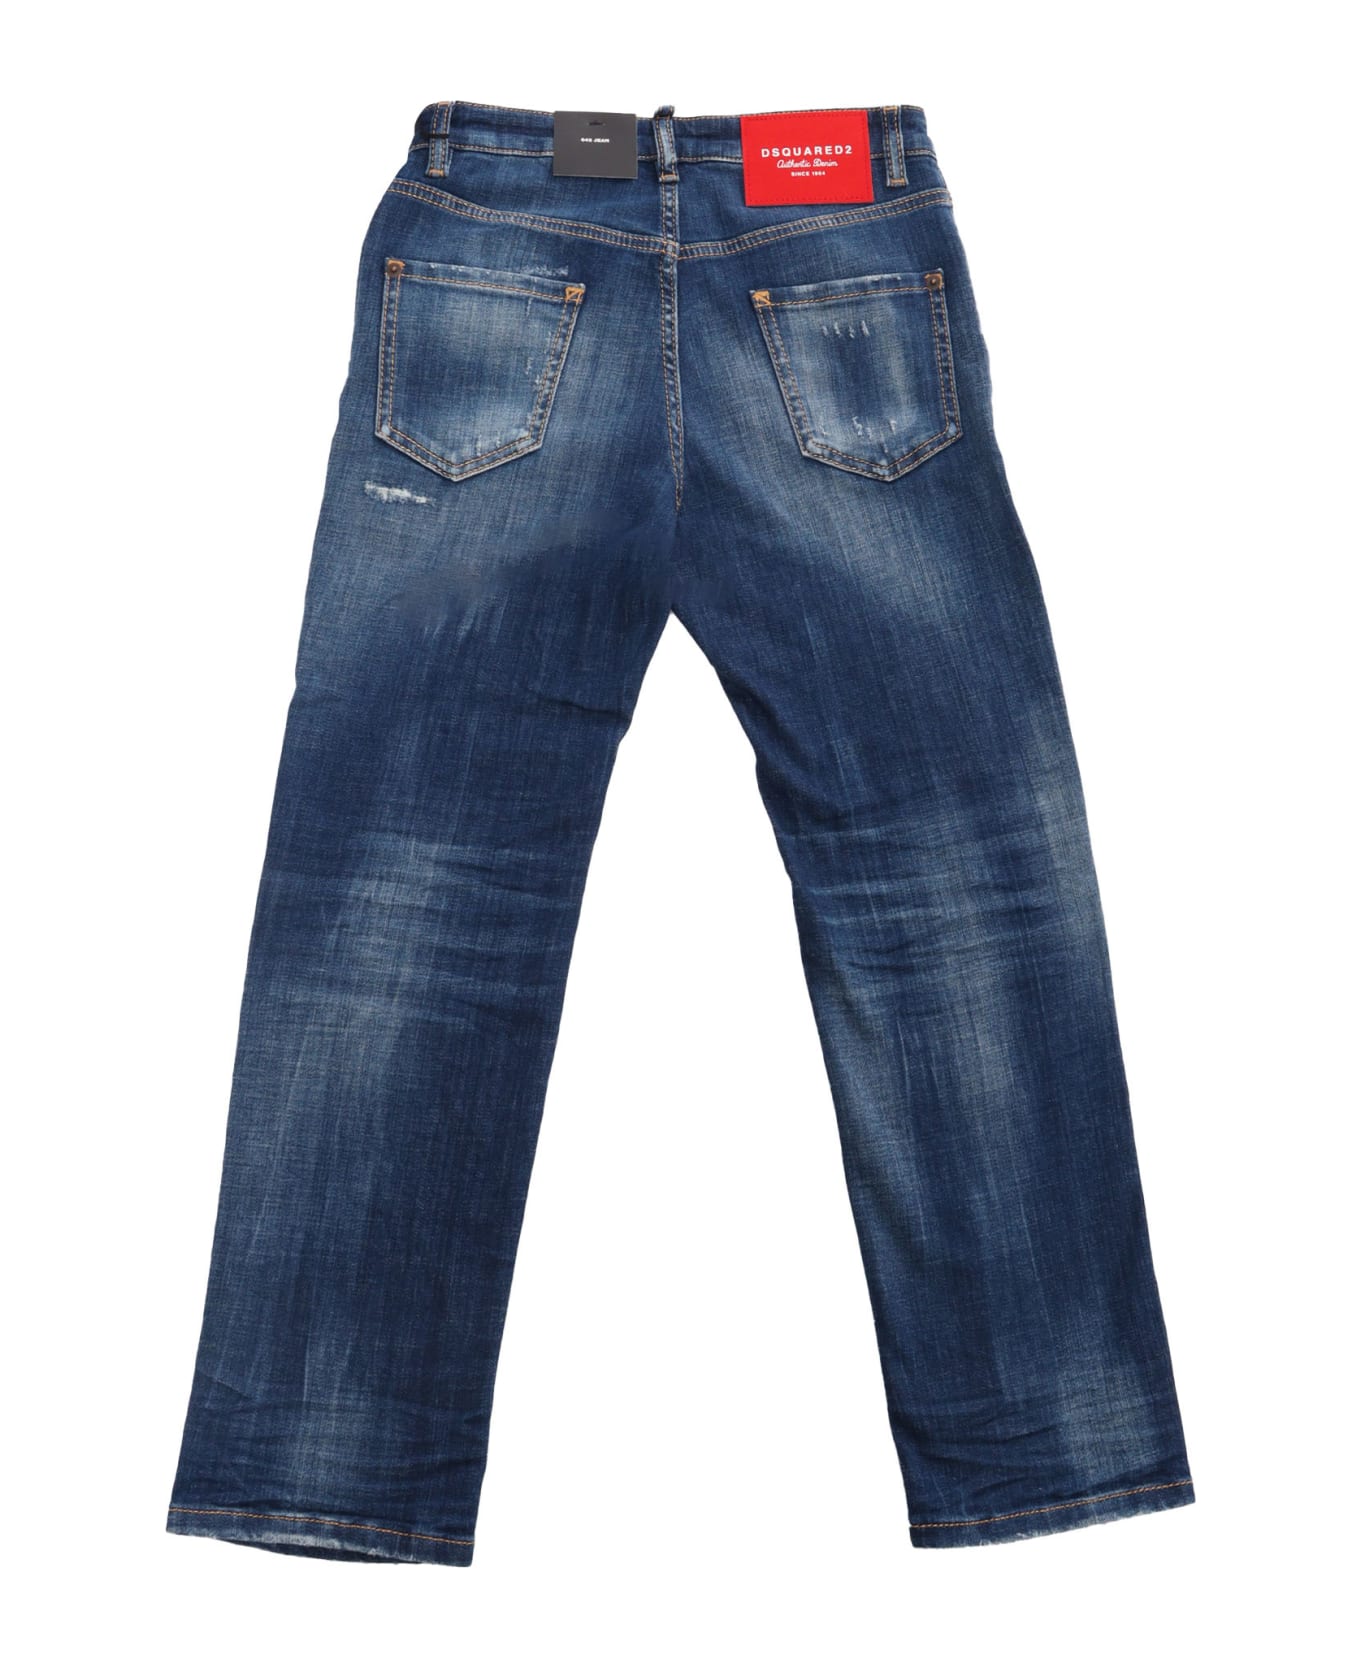 Dsquared2 Jeans - BLUE ボトムス